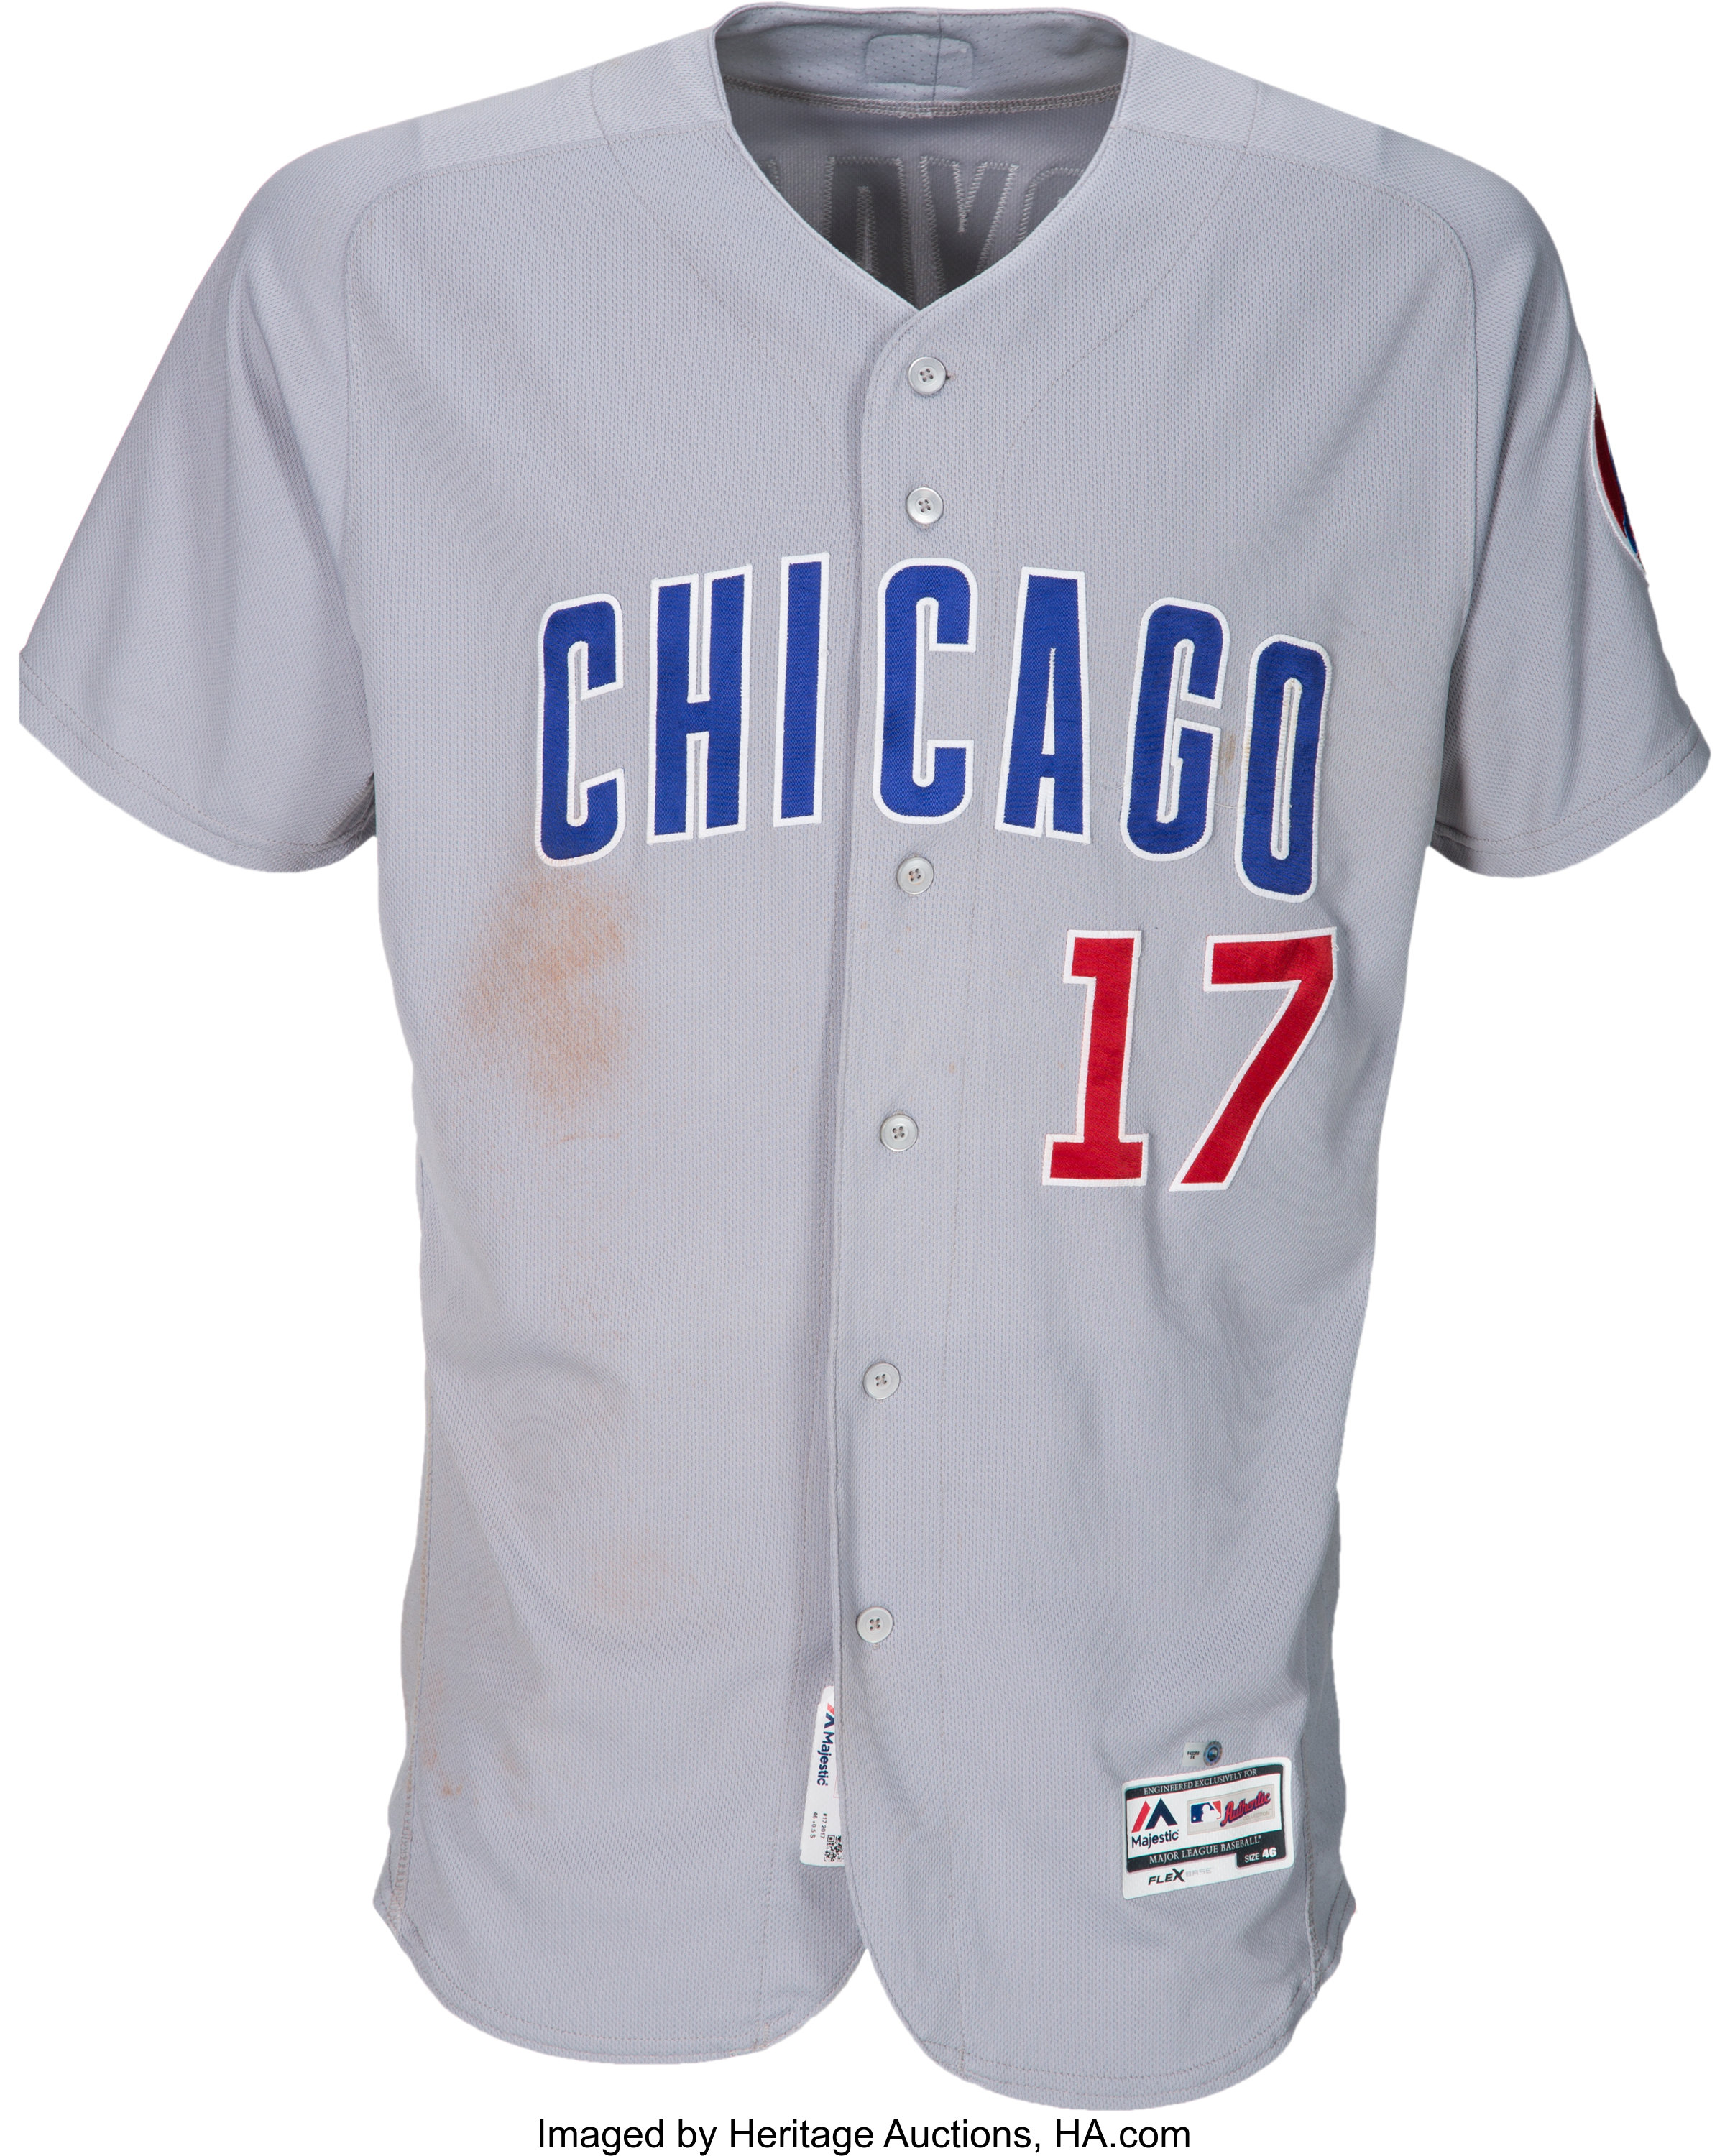 Cubs rookie Kris Bryant second in overall baseball jersey sales